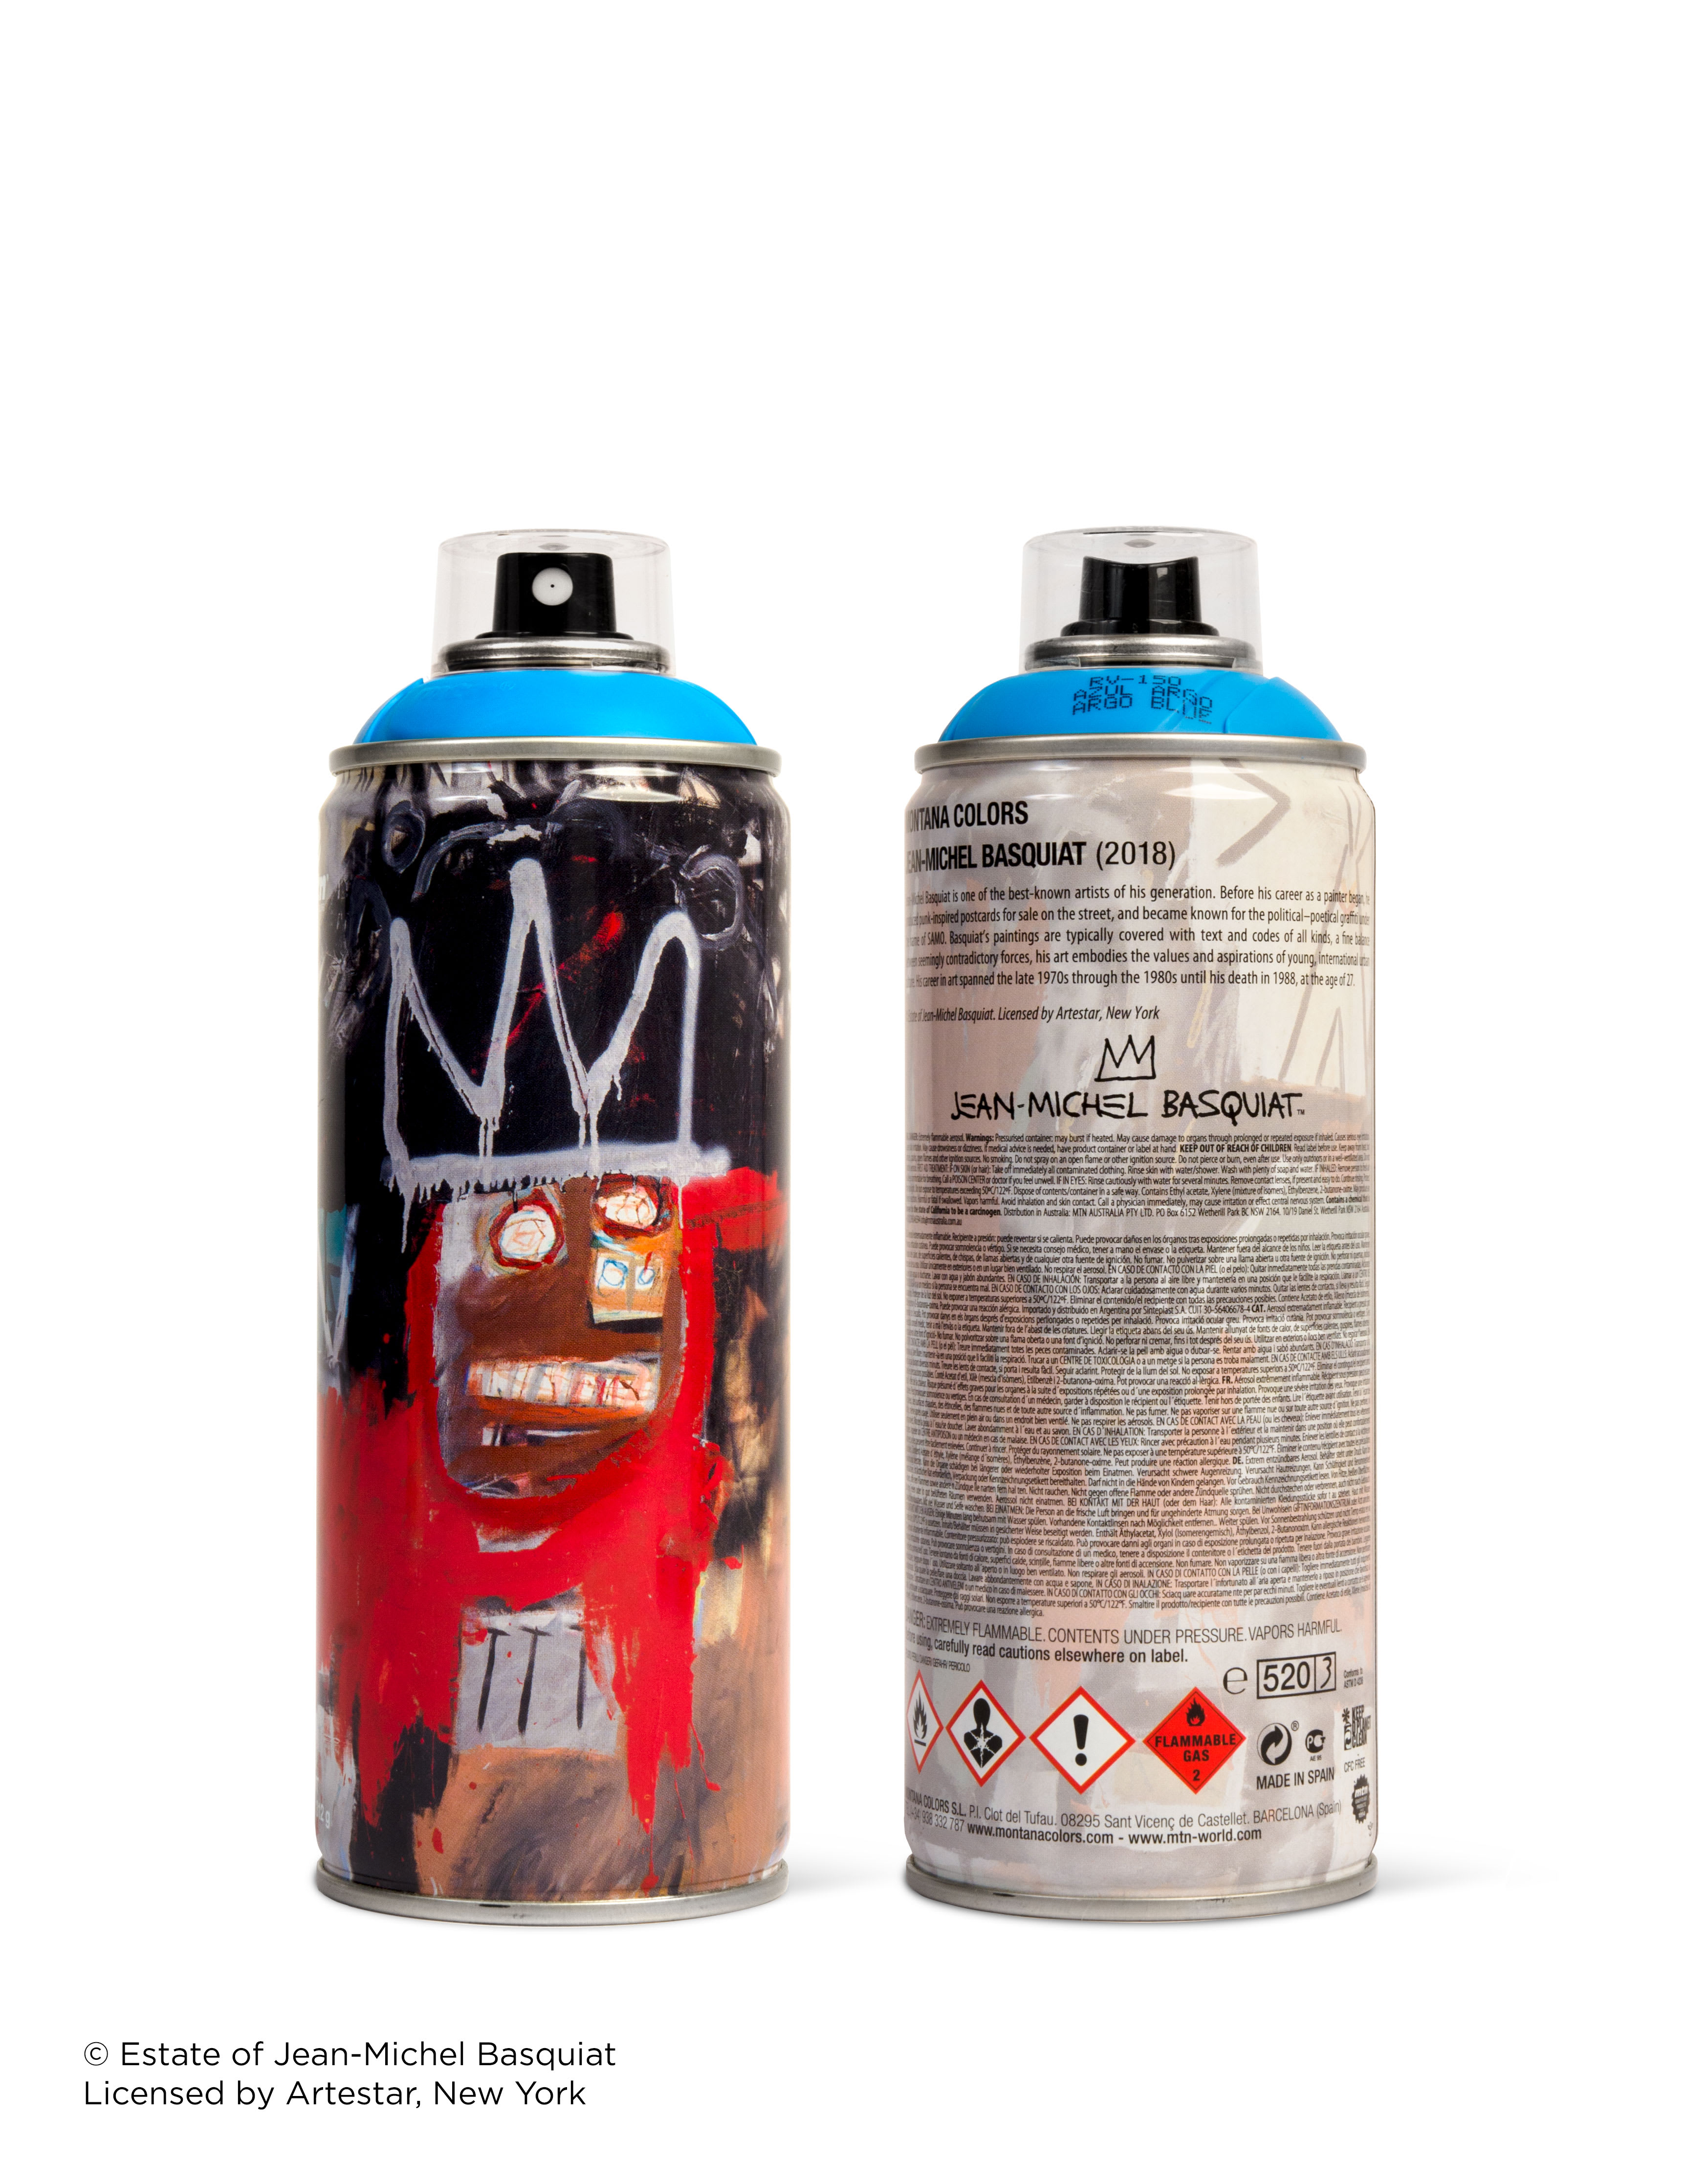 Red Jean-Michel Basquiat spray paint can for Beyond The Streets.